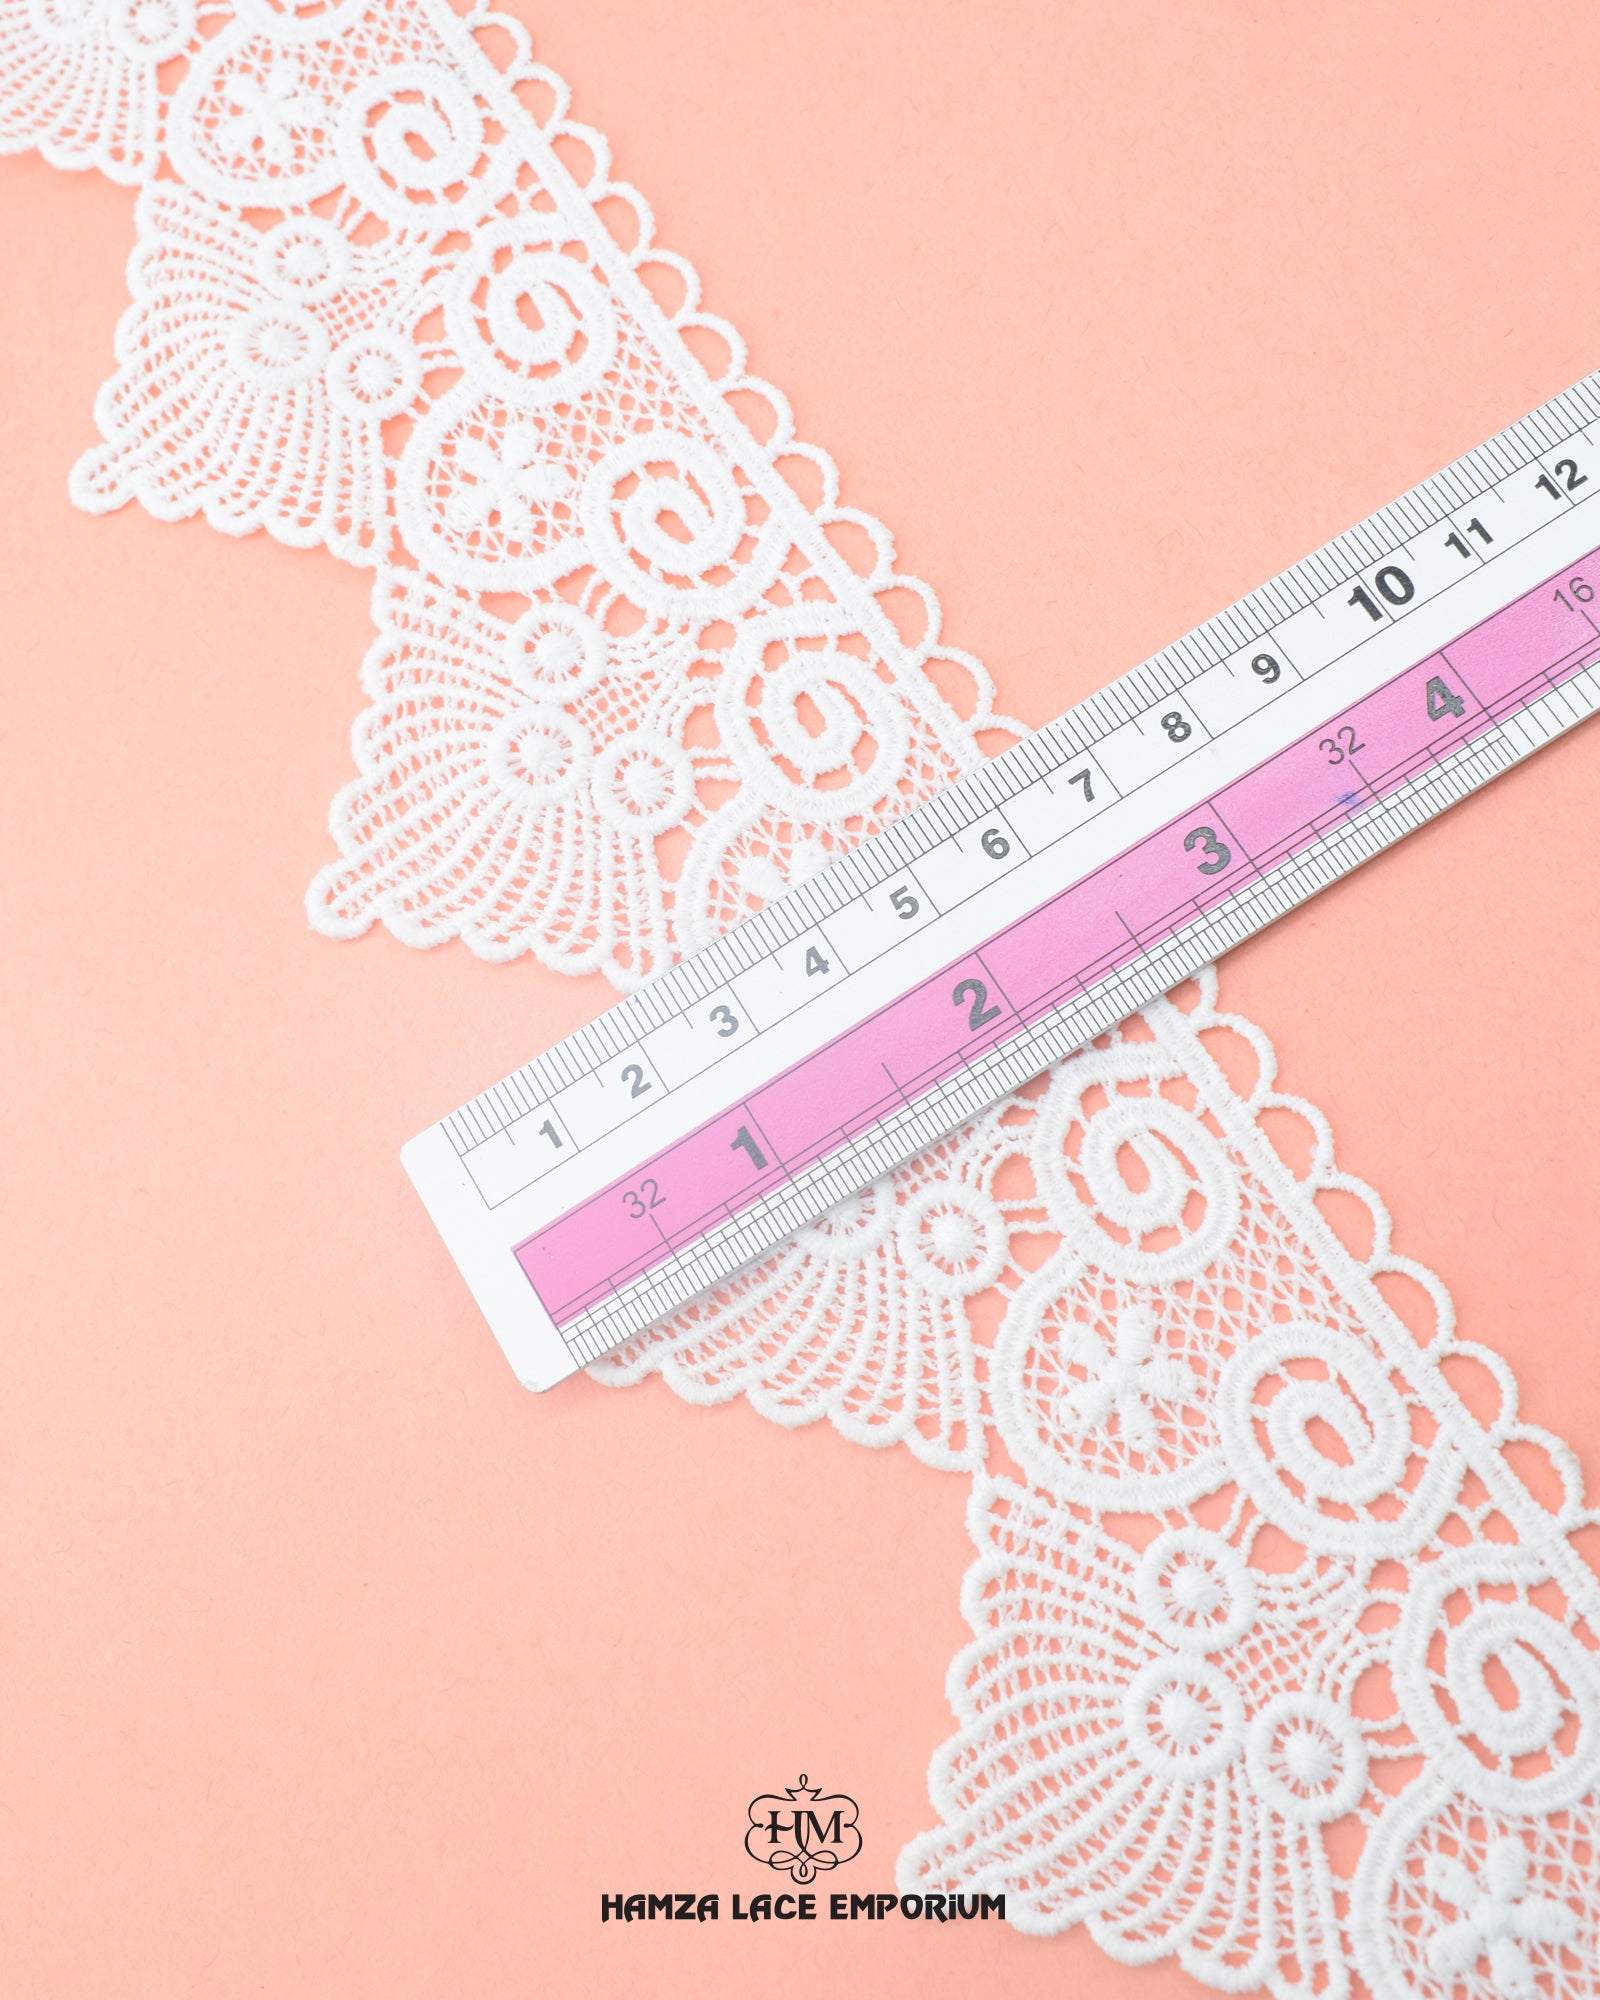 Size of the 'Edging Lace 6776' is shown as '1.5' inches with the help of a ruler